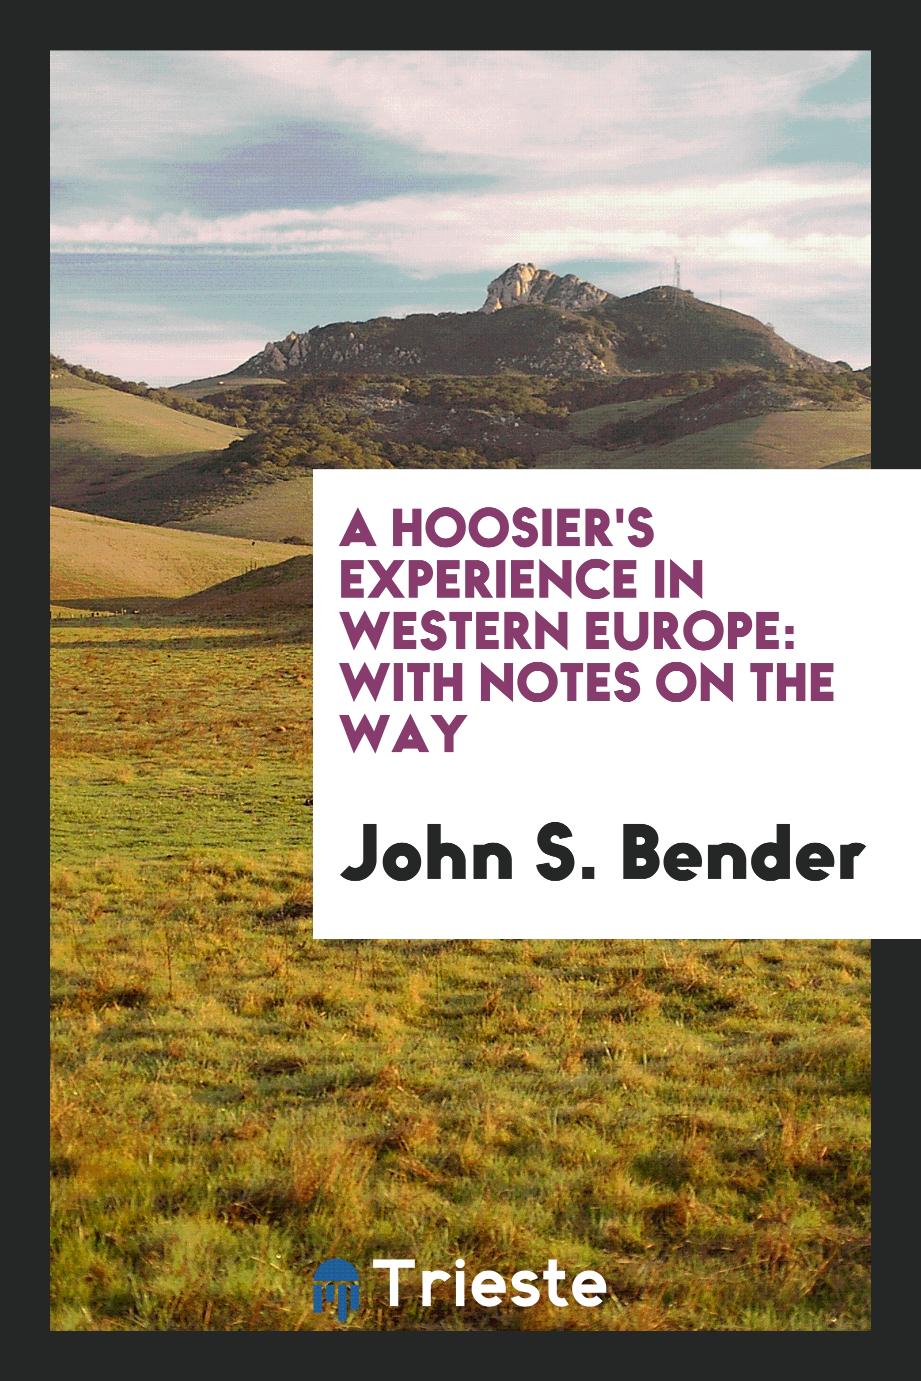 A Hoosier's experience in western Europe: with notes on the way